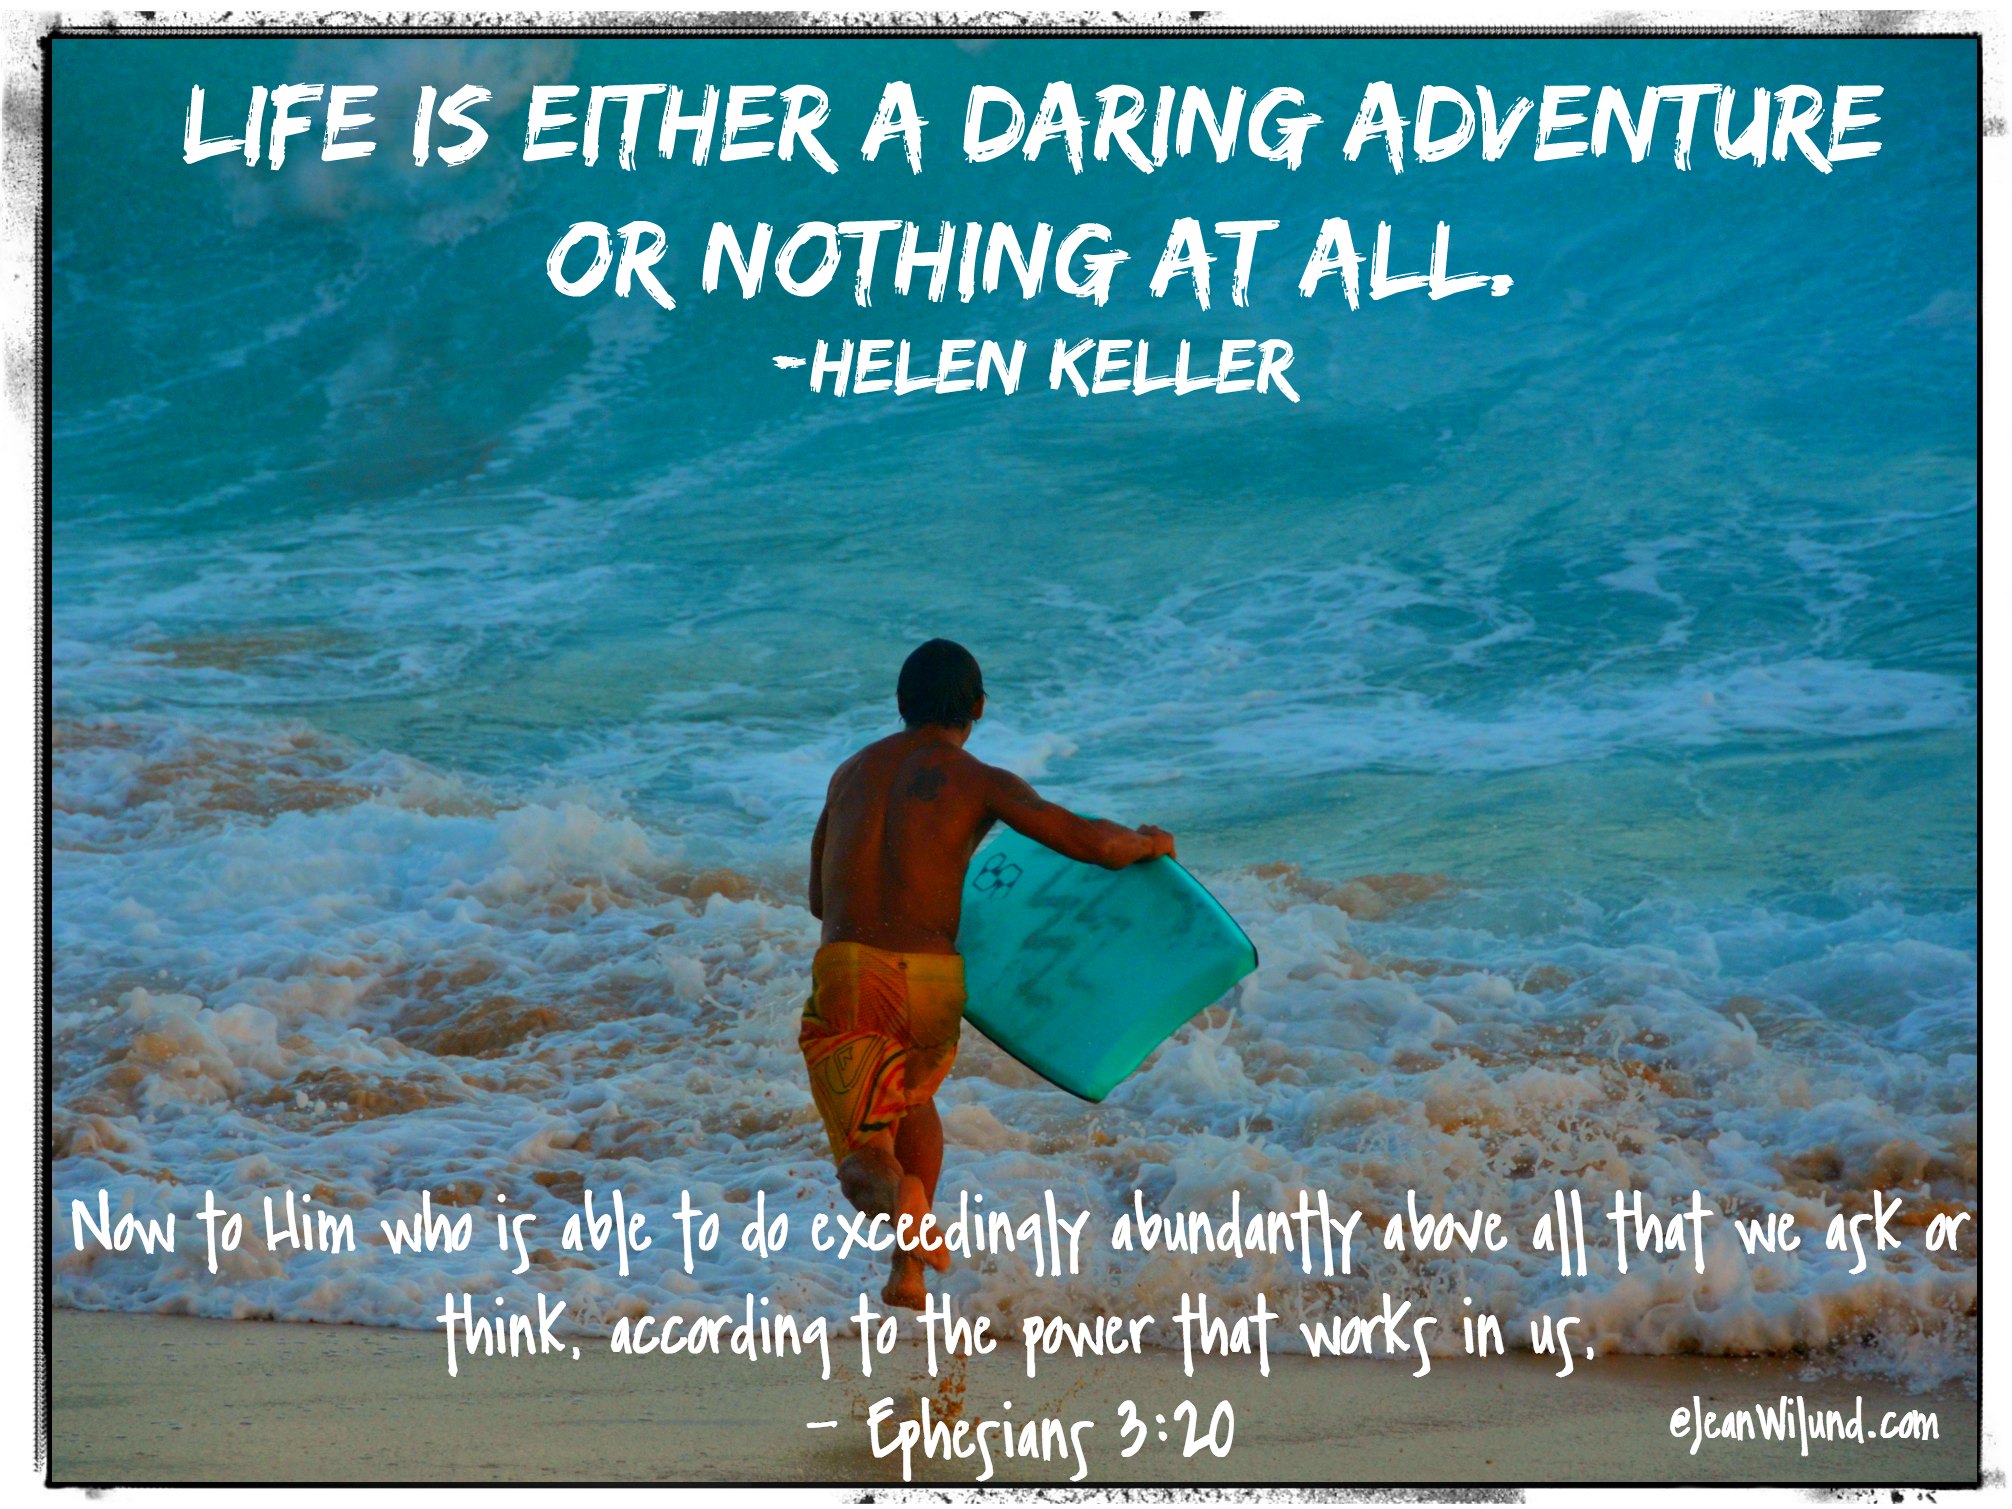 Life Is Either a Daring Adventure Or Nothing At All ~ Take It On!